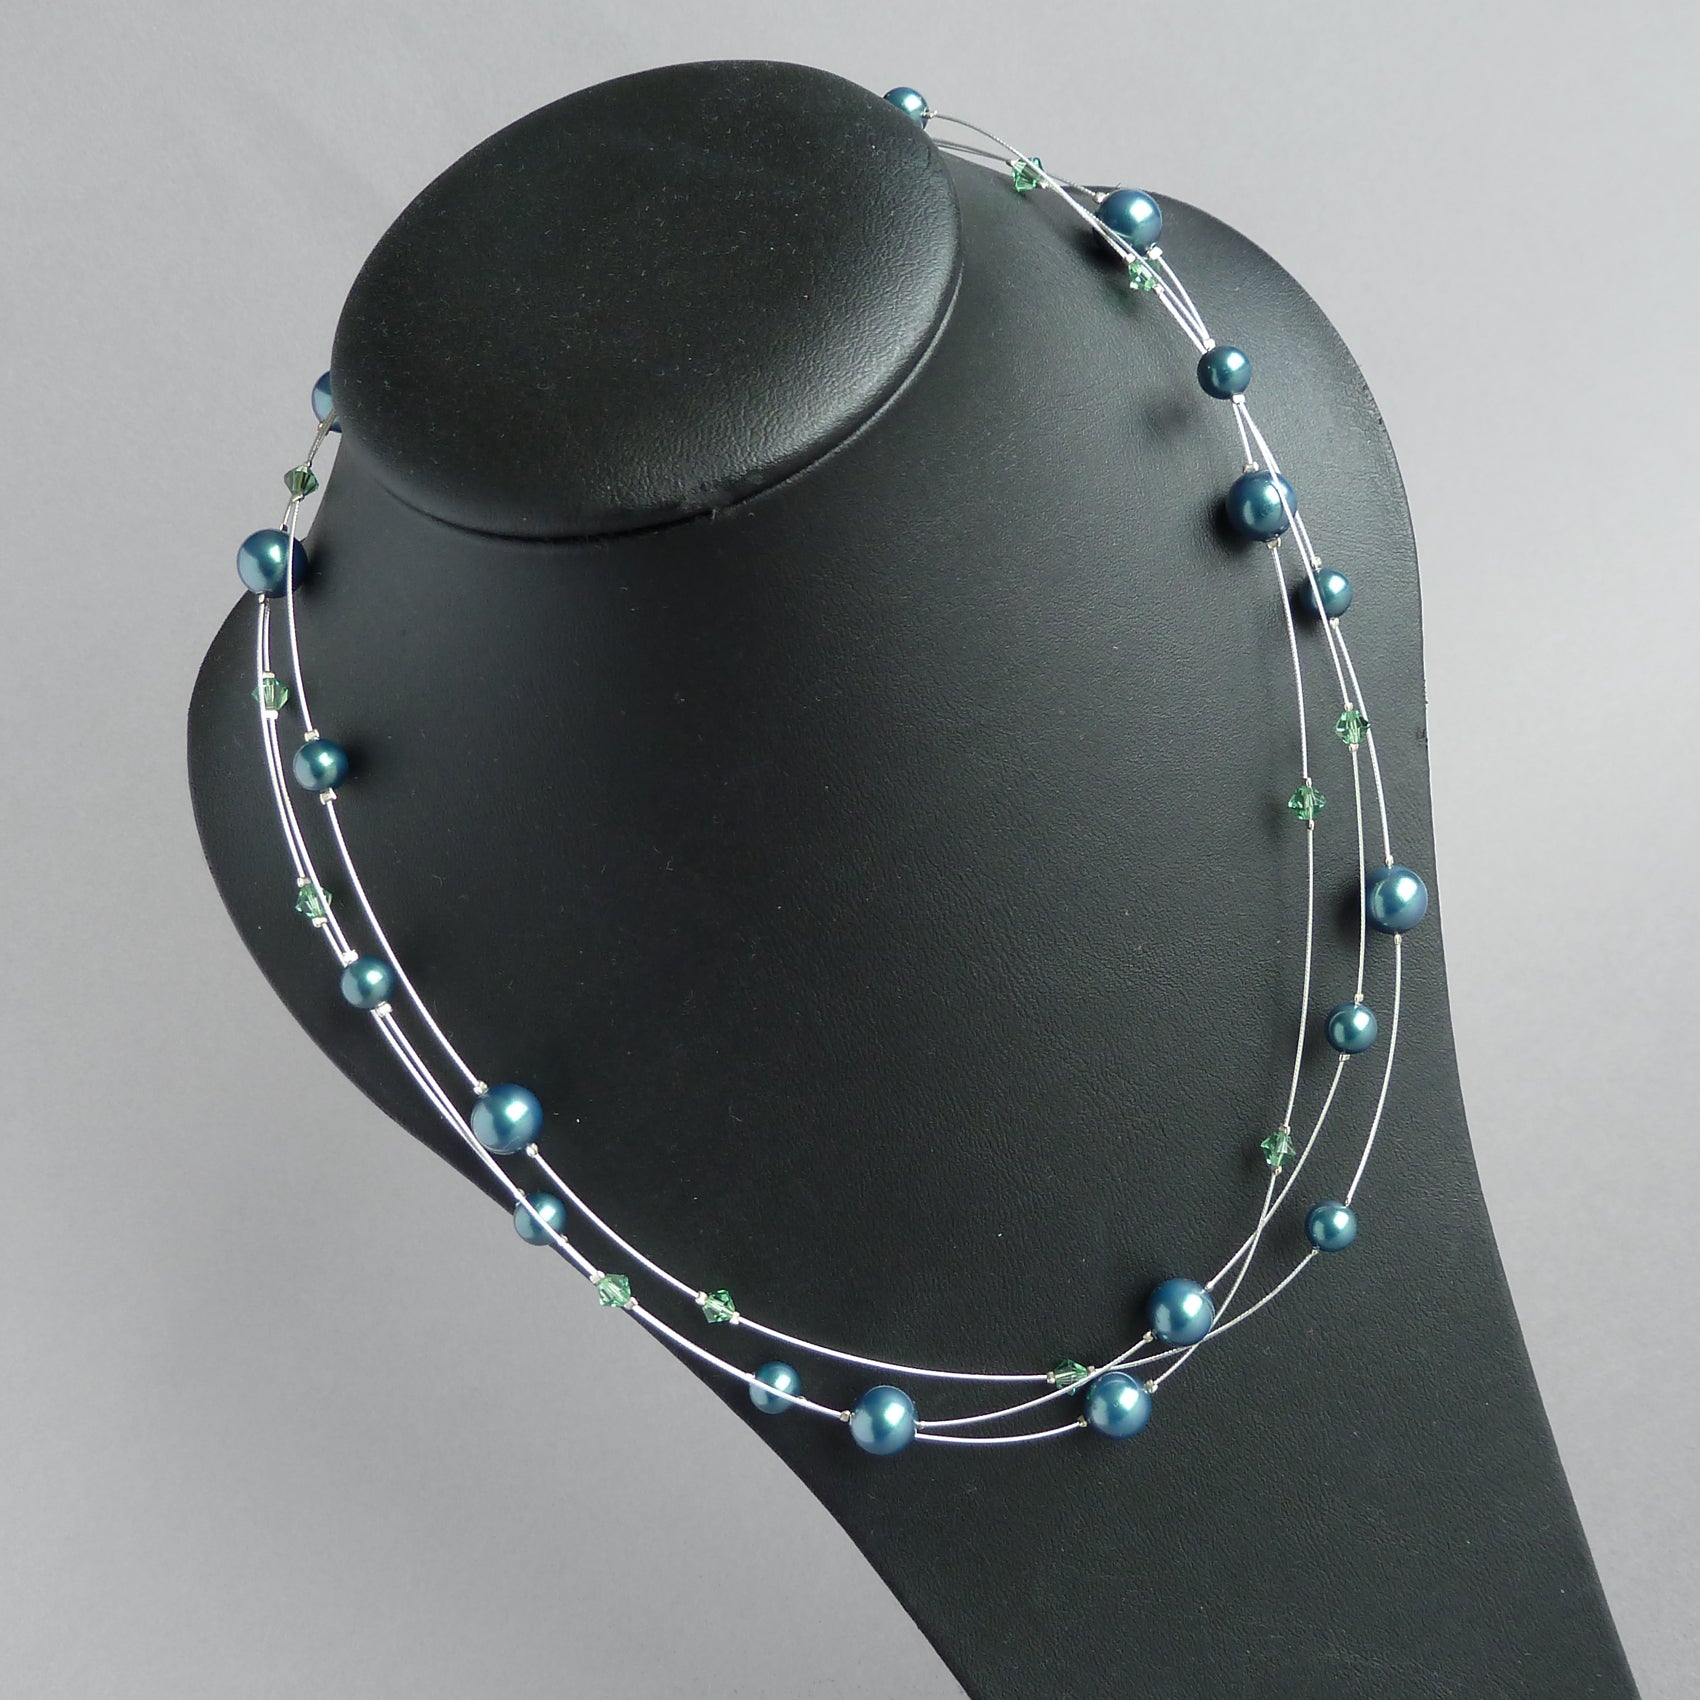 Teal pearl and crystal necklaces for weddings